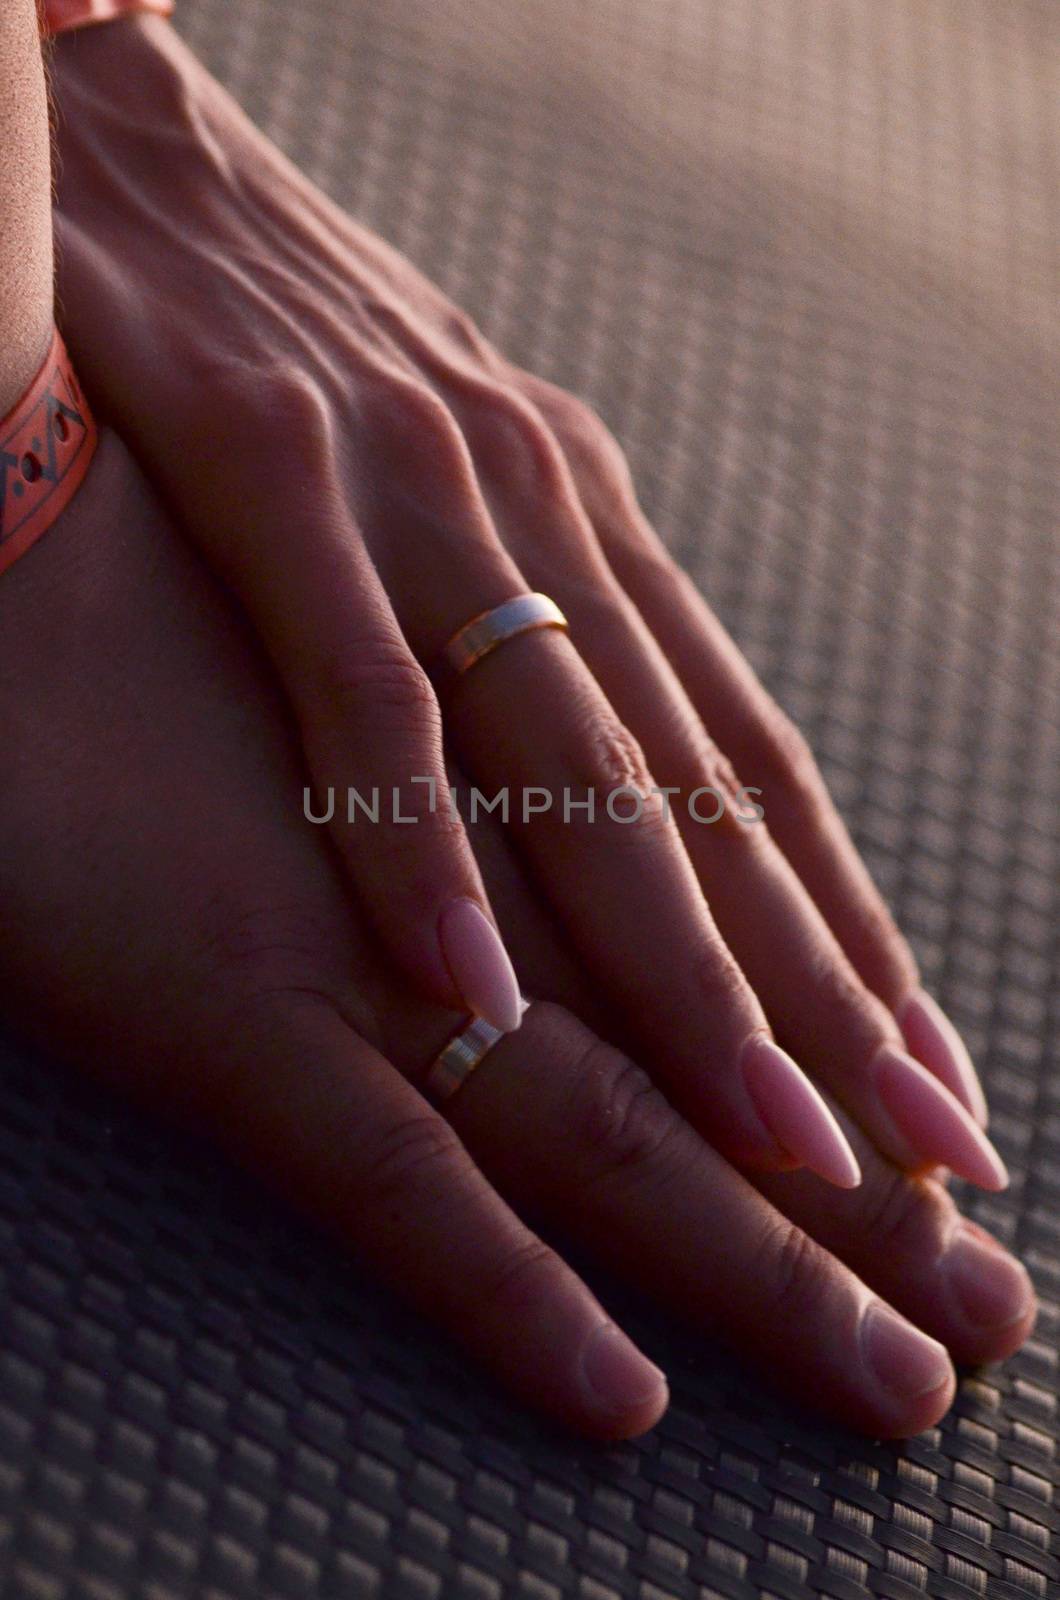 Newlyweds hands with wedding rings on the finger by pippocarlot